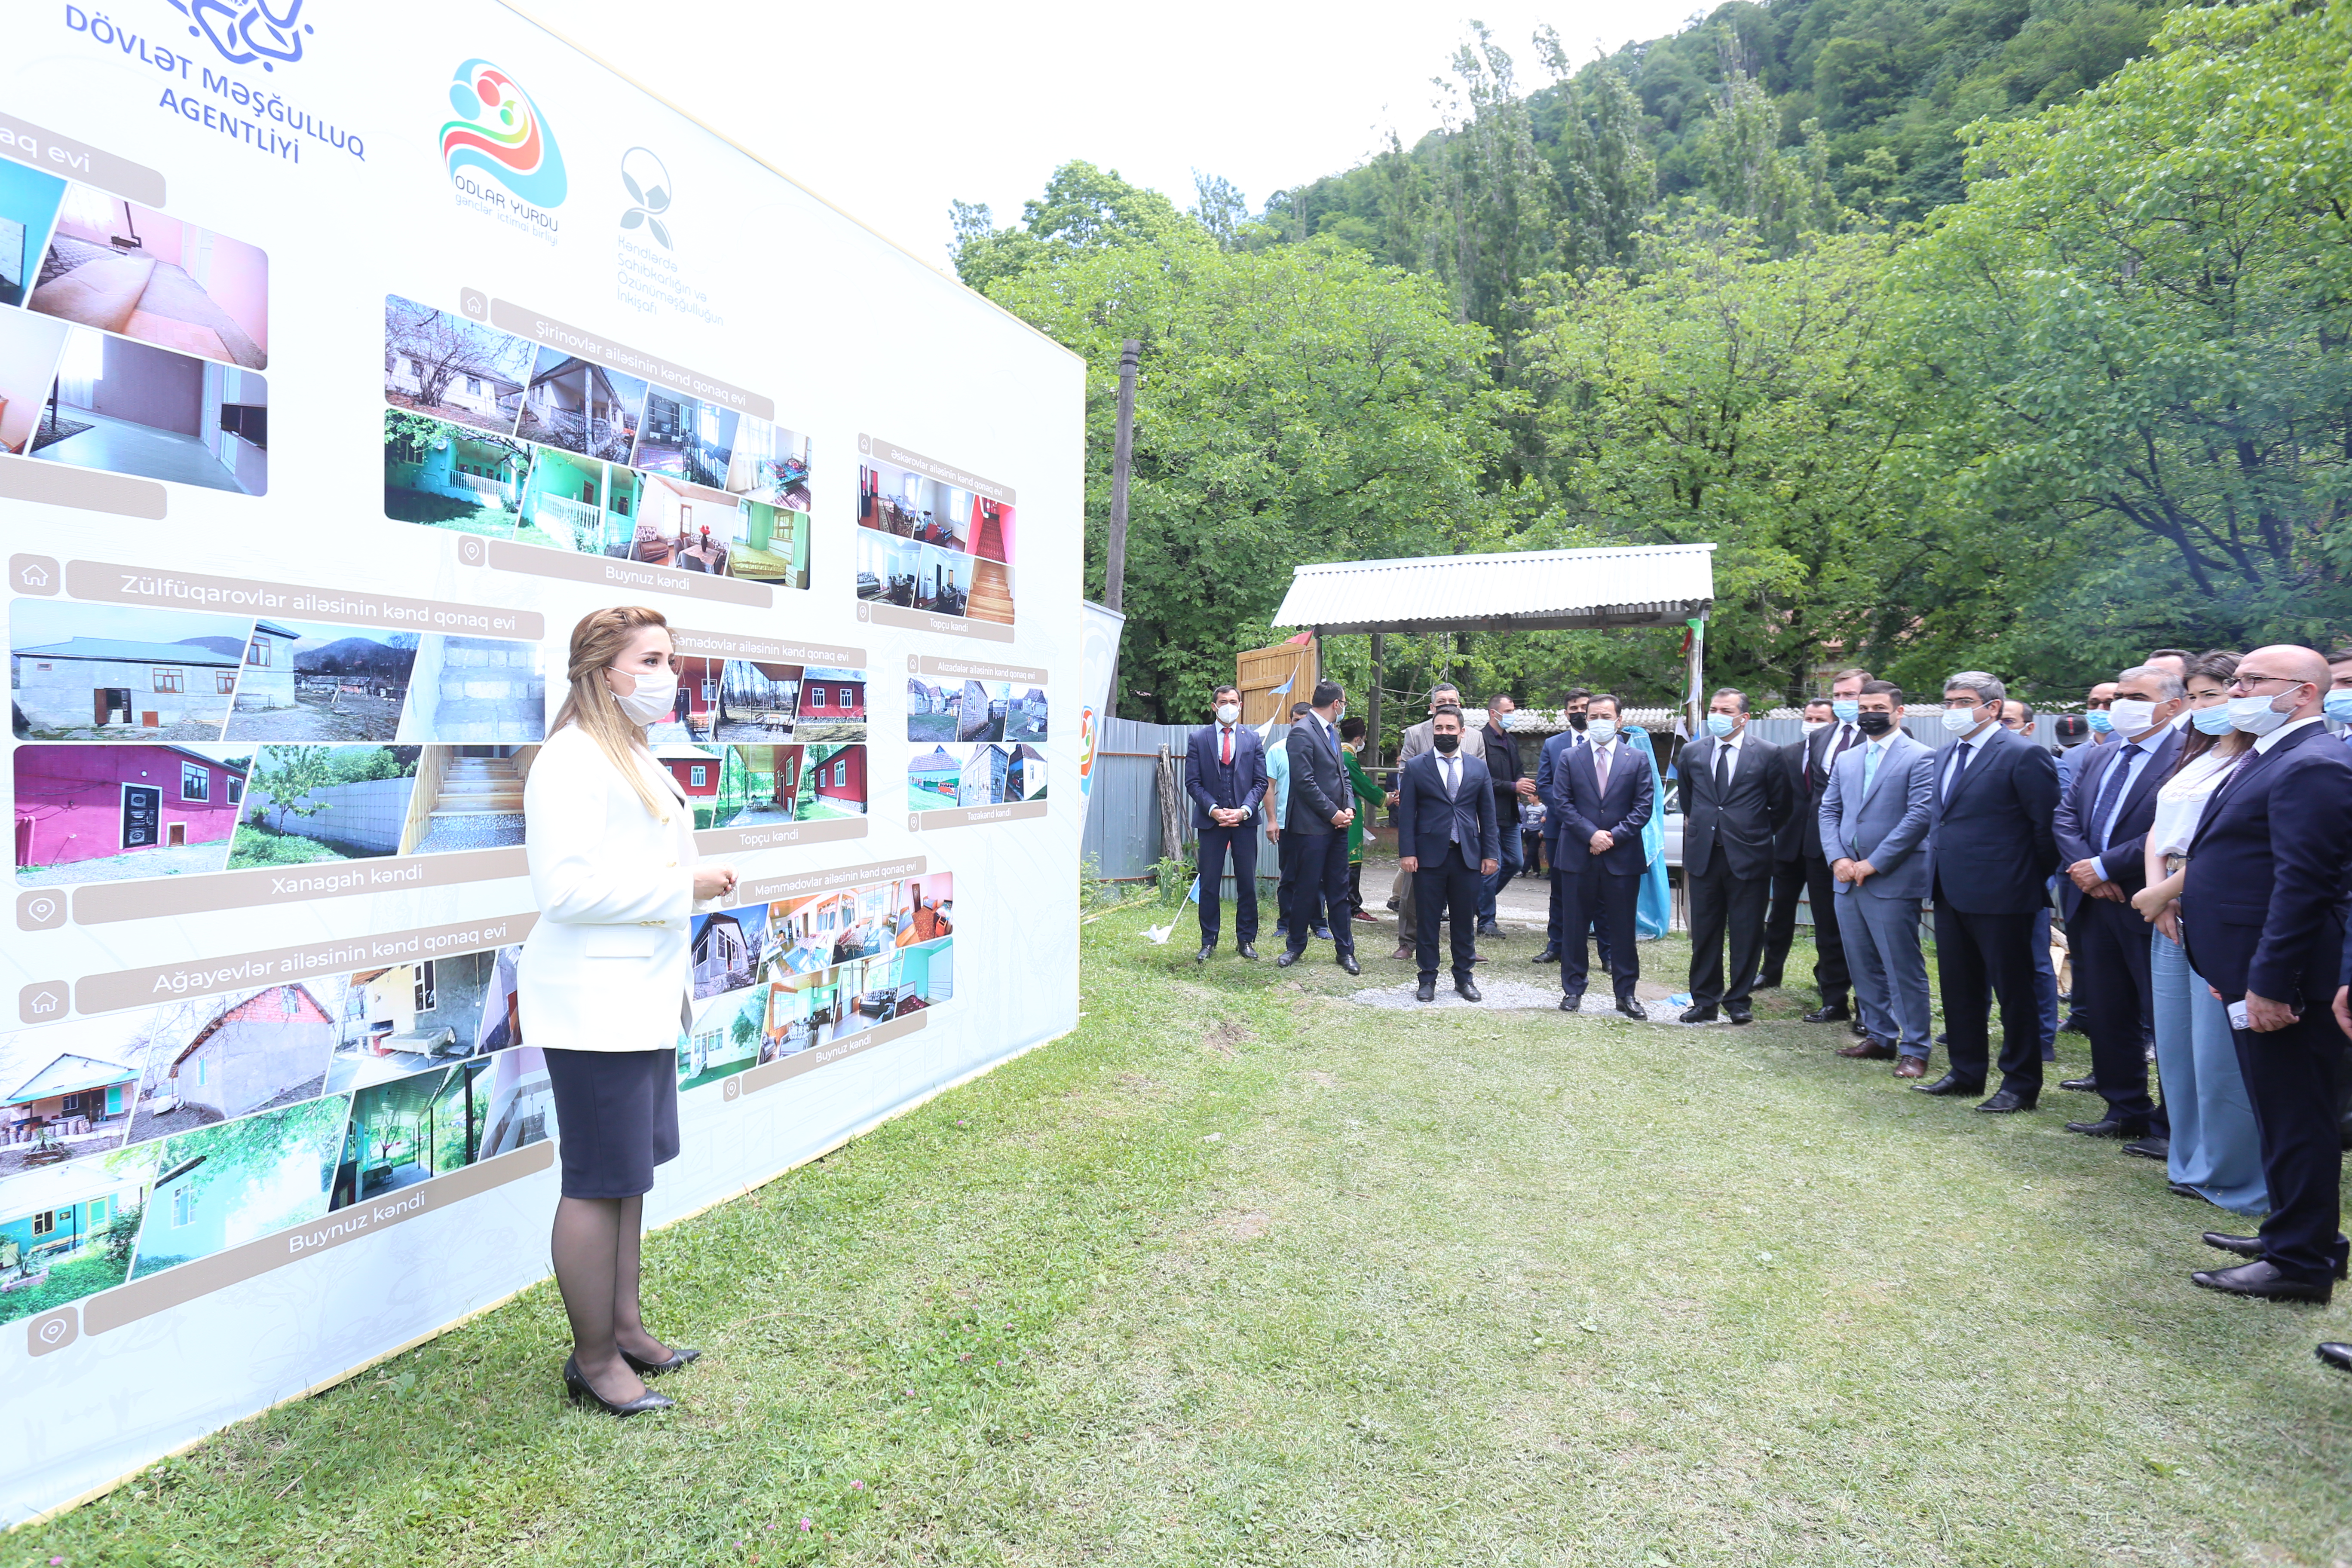 15 rural guesthouses were built in the Ismayilli region with state support 